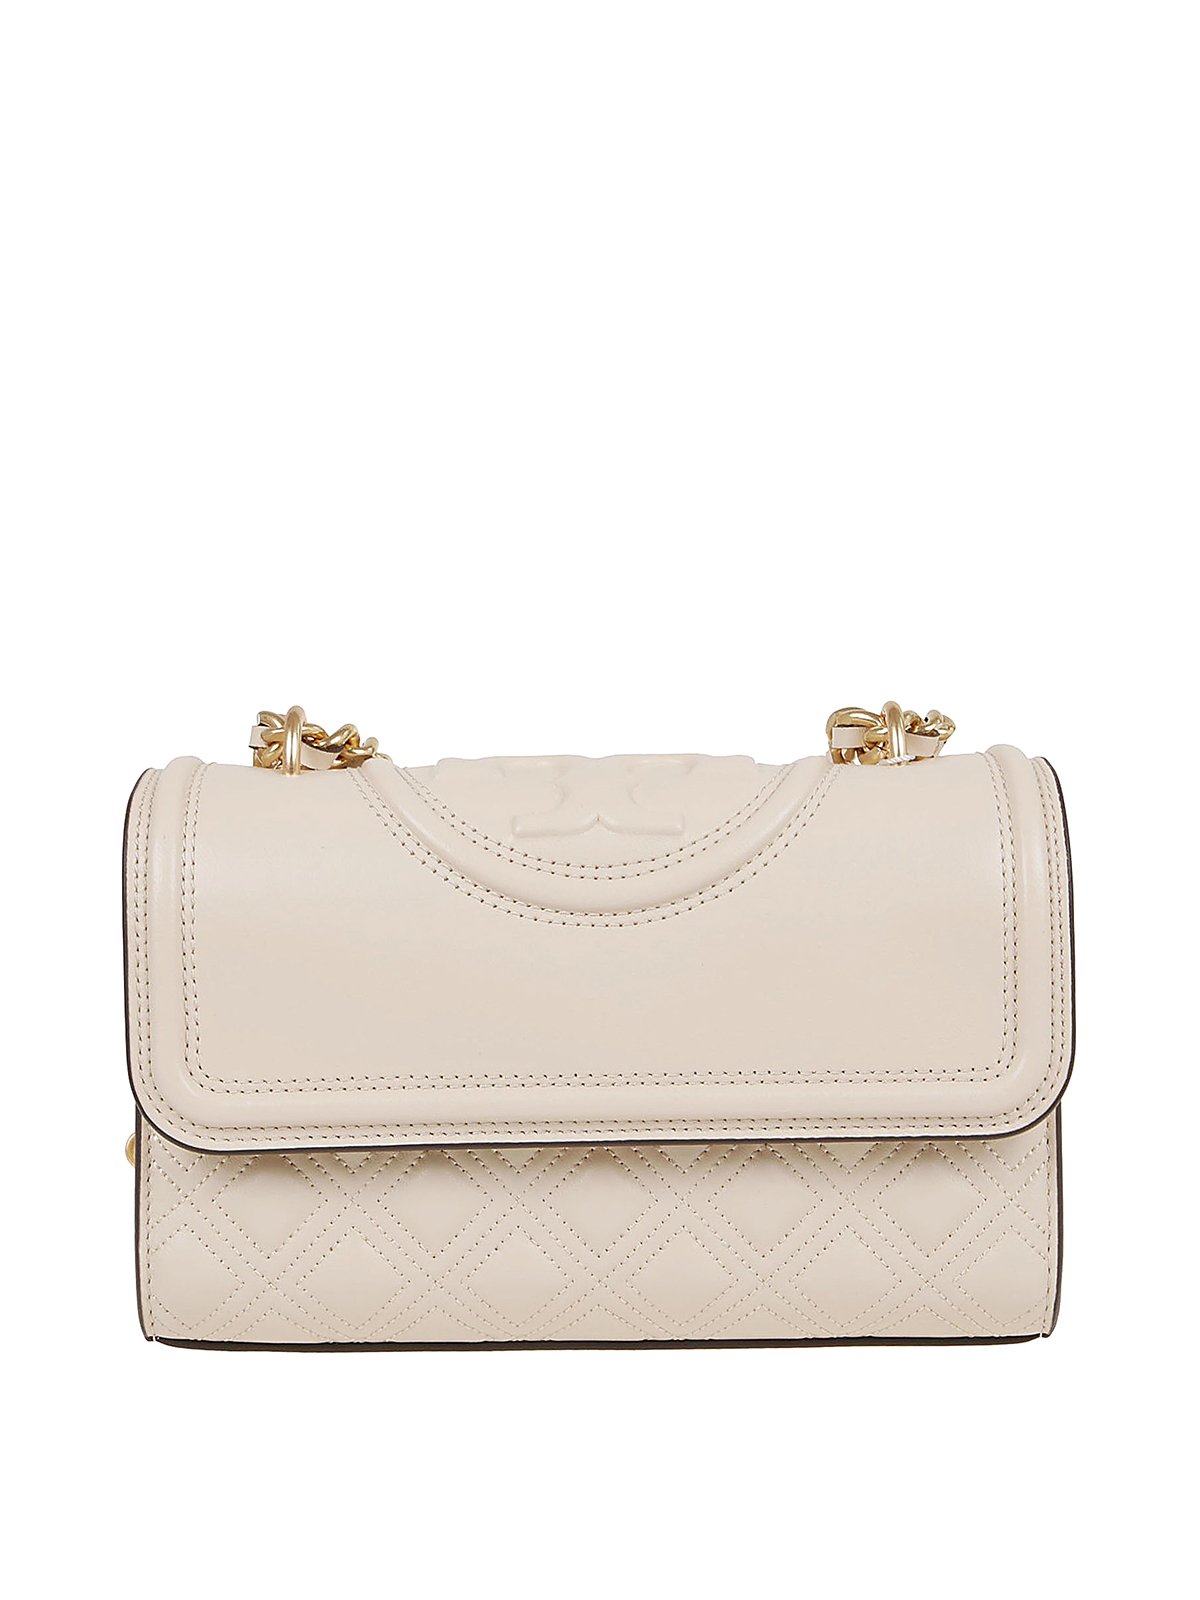 Tory Burch Small Quilted Leather Fleming Bag In Light Beige